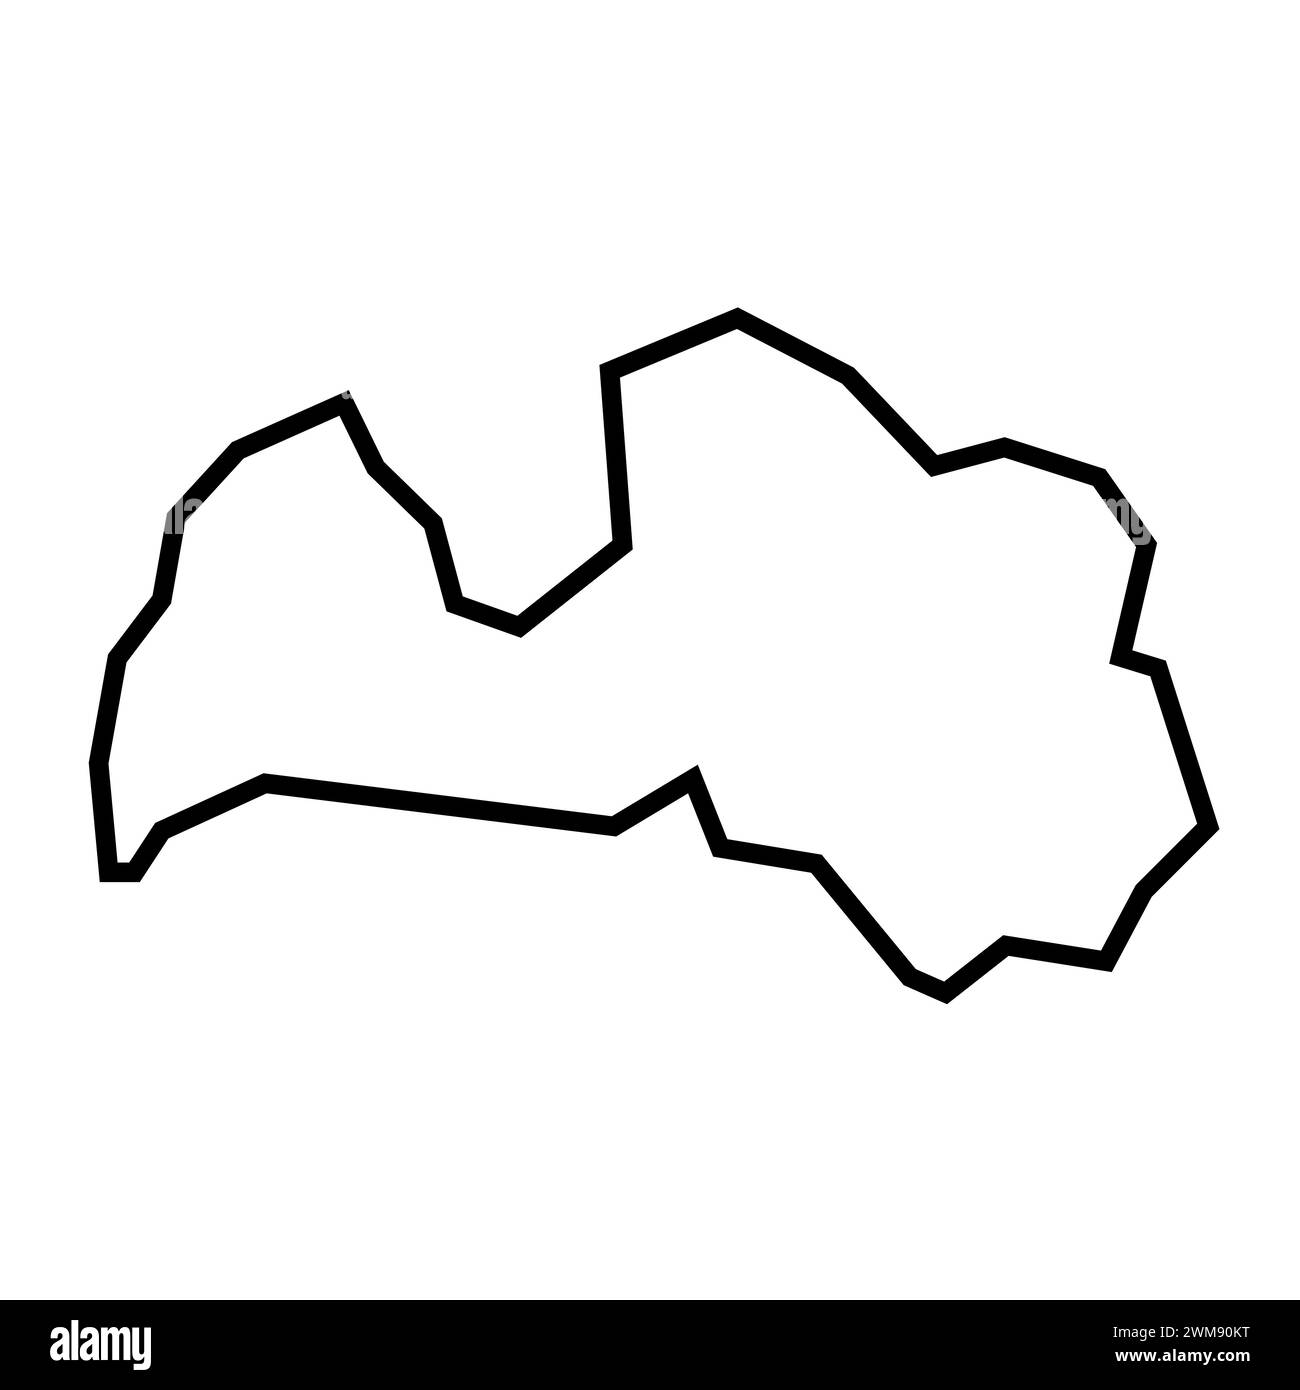 Latvia country thick black outline silhouette. Simplified map. Vector icon isolated on white background. Stock Vector